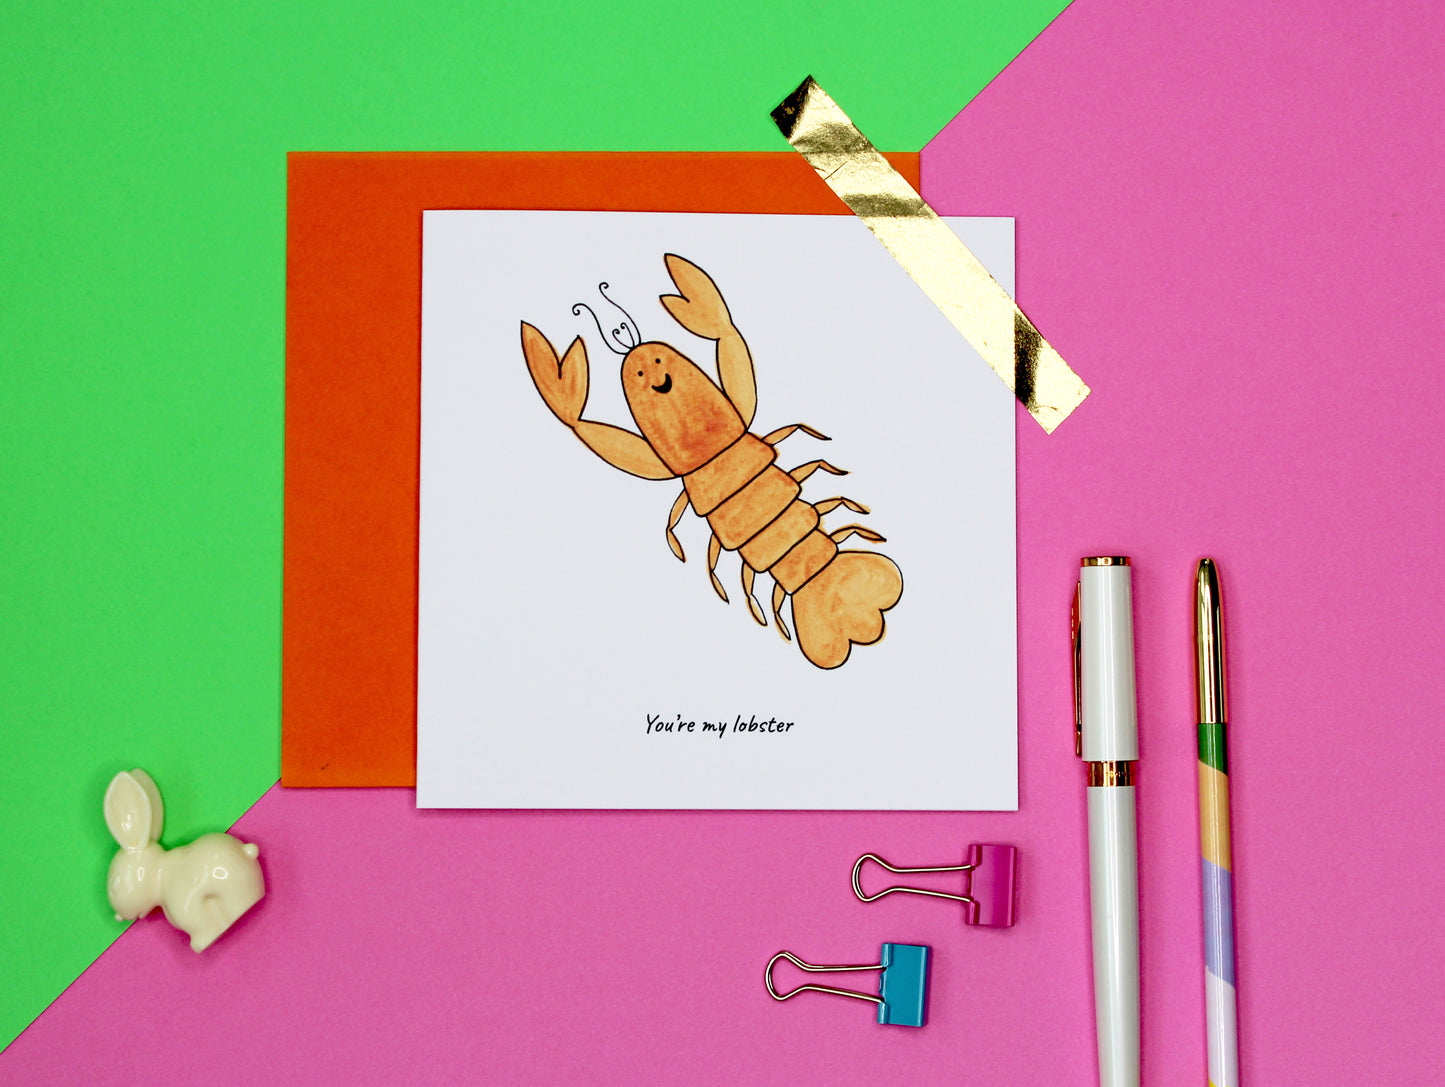 You're my lobster - funny lobster valentine's day / anniversary card